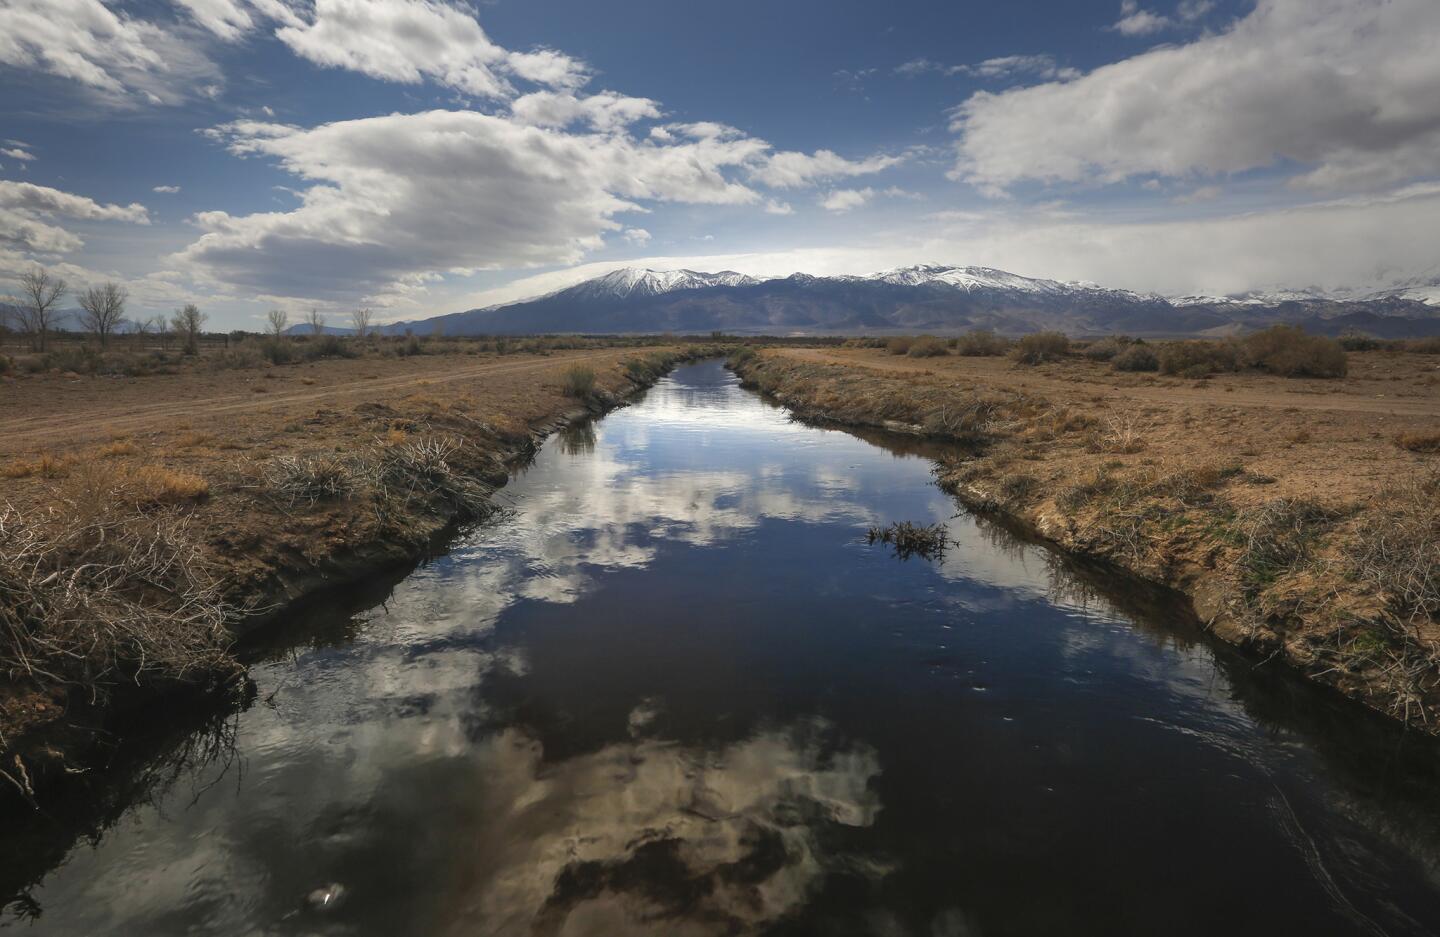 The clouds are reflected in the still waters of a water channel off Fish Slough Road in Bishop. With a season of record snowfall in the Sierras, the the Owens Valley is preparing for possible floods when the snowpack starts melting.